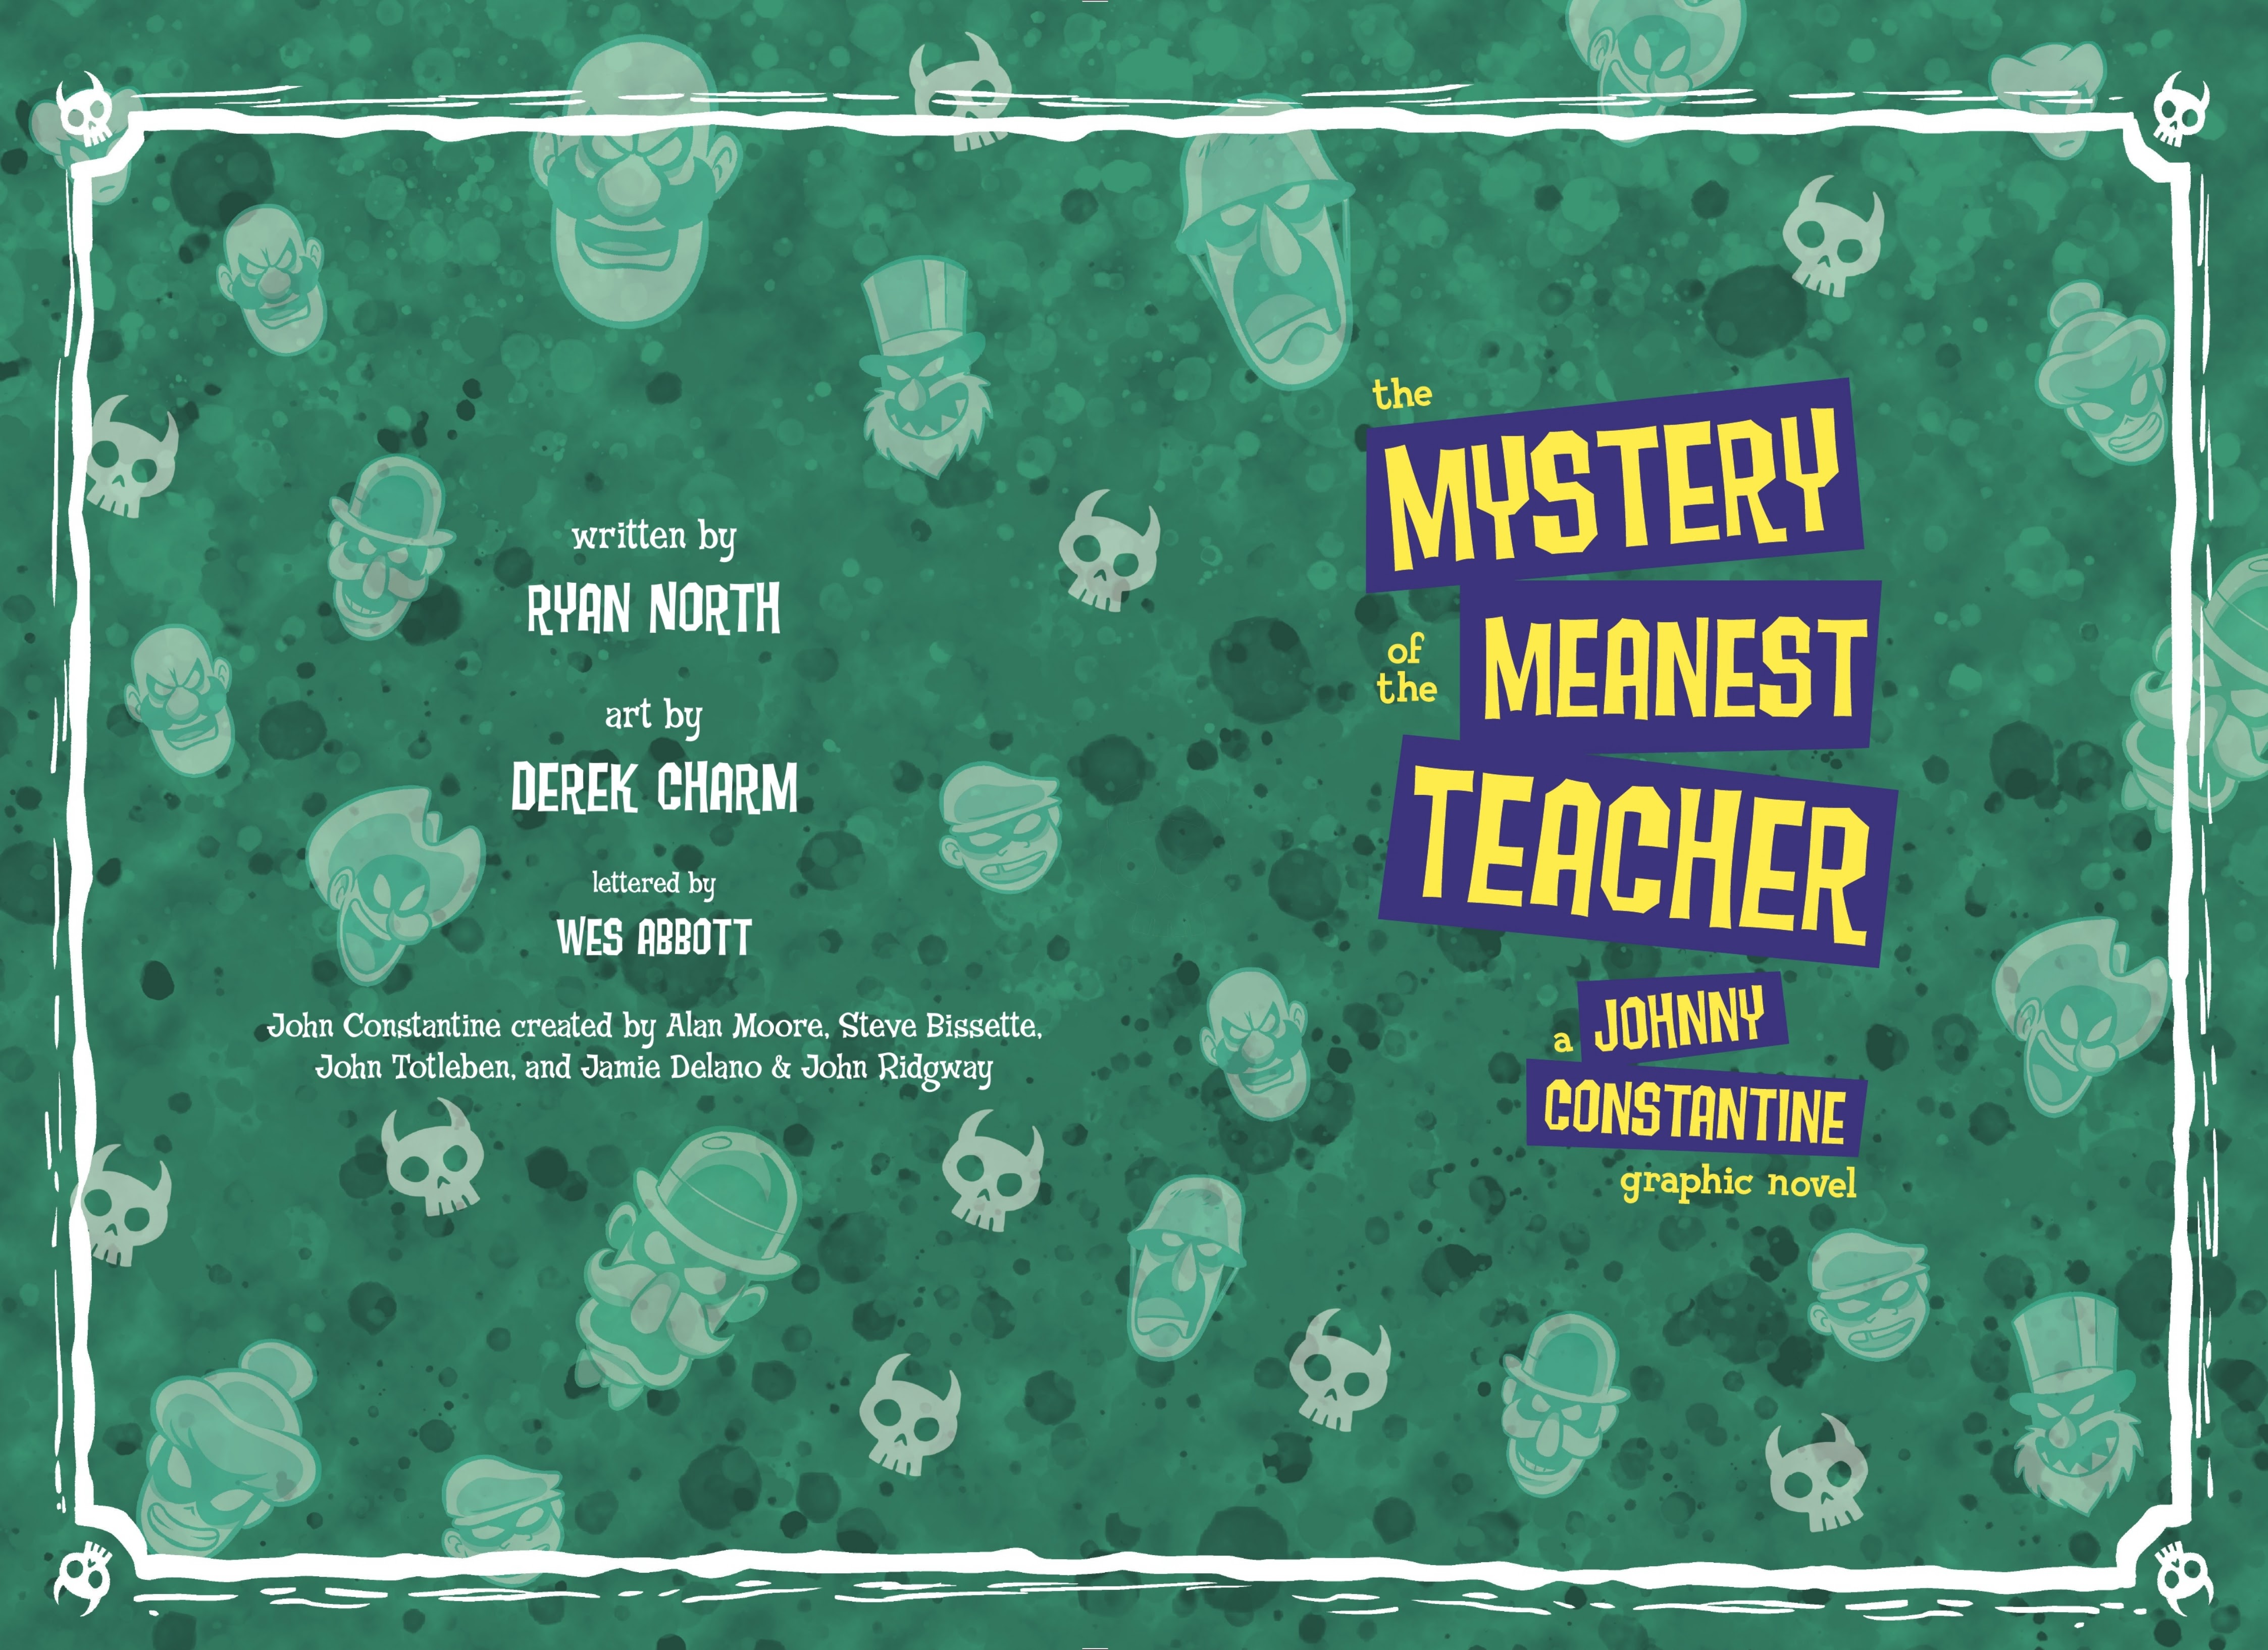 Read online The Mystery of the Meanest Teacher: A Johnny Constantine Graphic Novel comic -  Issue # TPB (Part 1) - 3